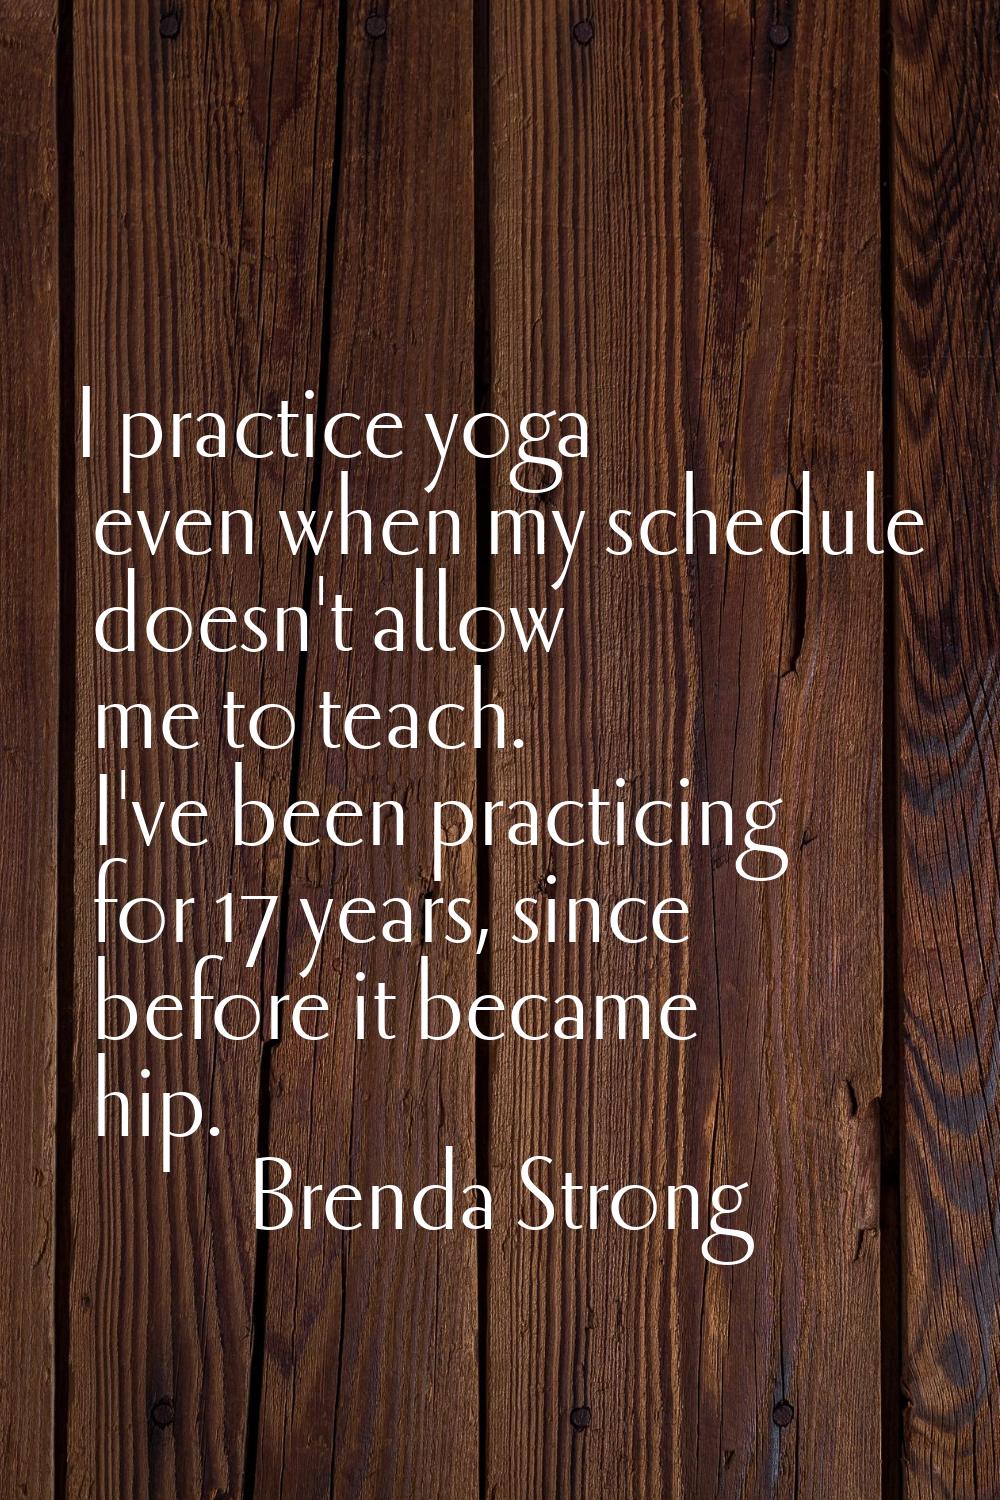 I practice yoga even when my schedule doesn't allow me to teach. I've been practicing for 17 years,